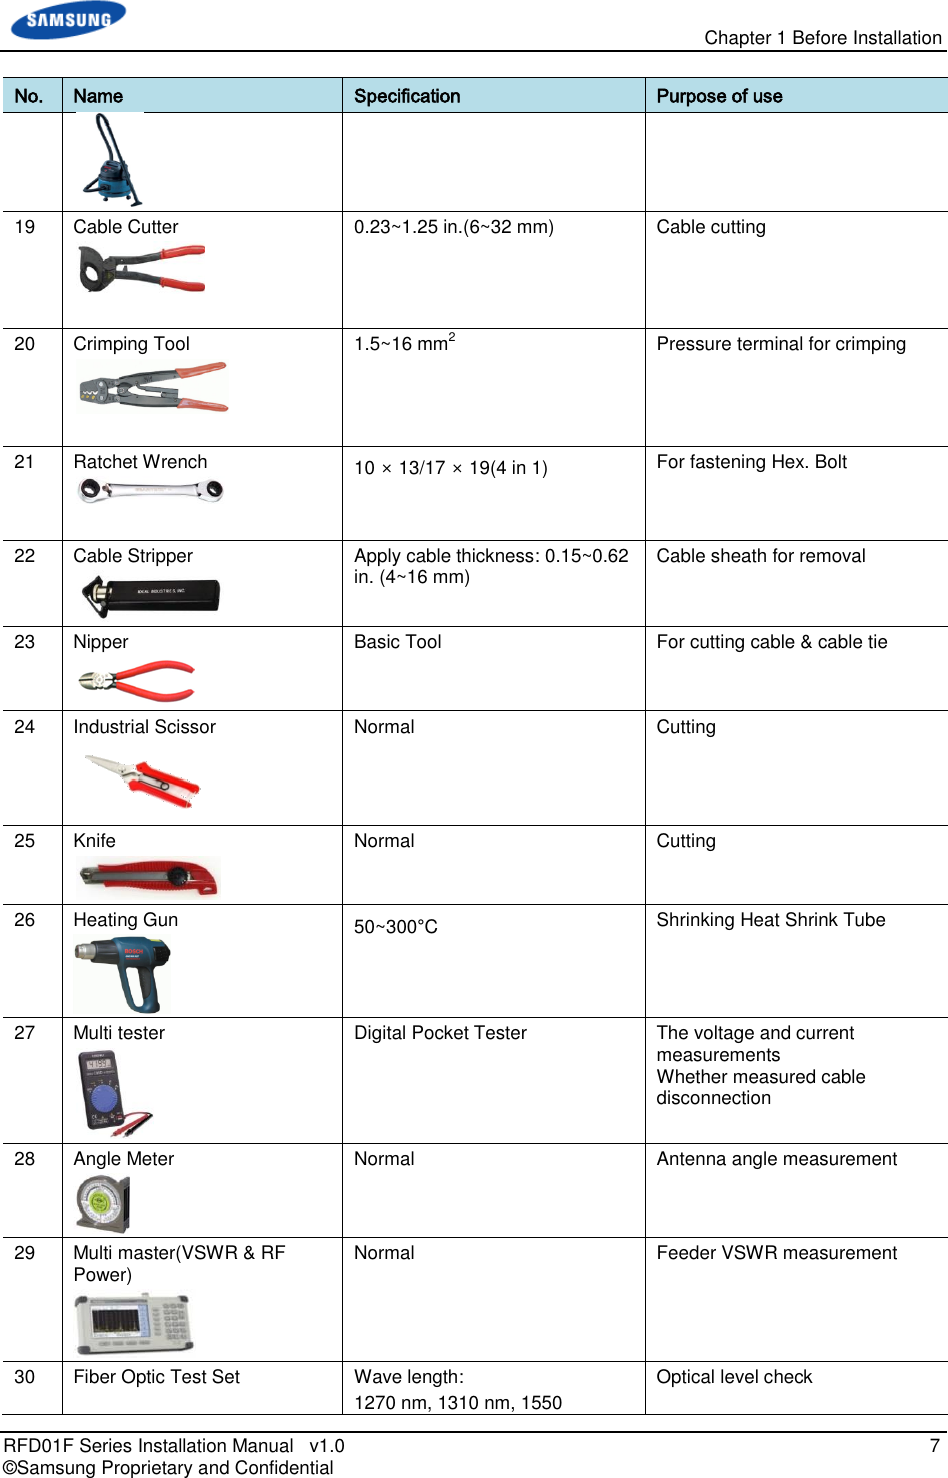   Chapter 1 Before Installation RFD01F Series Installation Manual   v1.0    7 © Samsung Proprietary and Confidential No. Name Specification Purpose of use  19 Cable Cutter  0.23~1.25 in.(6~32 mm) Cable cutting 20 Crimping Tool  1.5~16 mm2 Pressure terminal for crimping 21 Ratchet Wrench  10 × 13/17 × 19(4 in 1) For fastening Hex. Bolt 22 Cable Stripper  Apply cable thickness: 0.15~0.62 in. (4~16 mm) Cable sheath for removal 23 Nipper  Basic Tool For cutting cable &amp; cable tie 24 Industrial Scissor  Normal Cutting 25 Knife  Normal Cutting 26 Heating Gun  50~300°C Shrinking Heat Shrink Tube 27 Multi tester  Digital Pocket Tester The voltage and current measurements Whether measured cable disconnection 28 Angle Meter  Normal Antenna angle measurement 29 Multi master(VSWR &amp; RF Power)  Normal Feeder VSWR measurement 30 Fiber Optic Test Set Wave length: 1270 nm, 1310 nm, 1550 Optical level check 